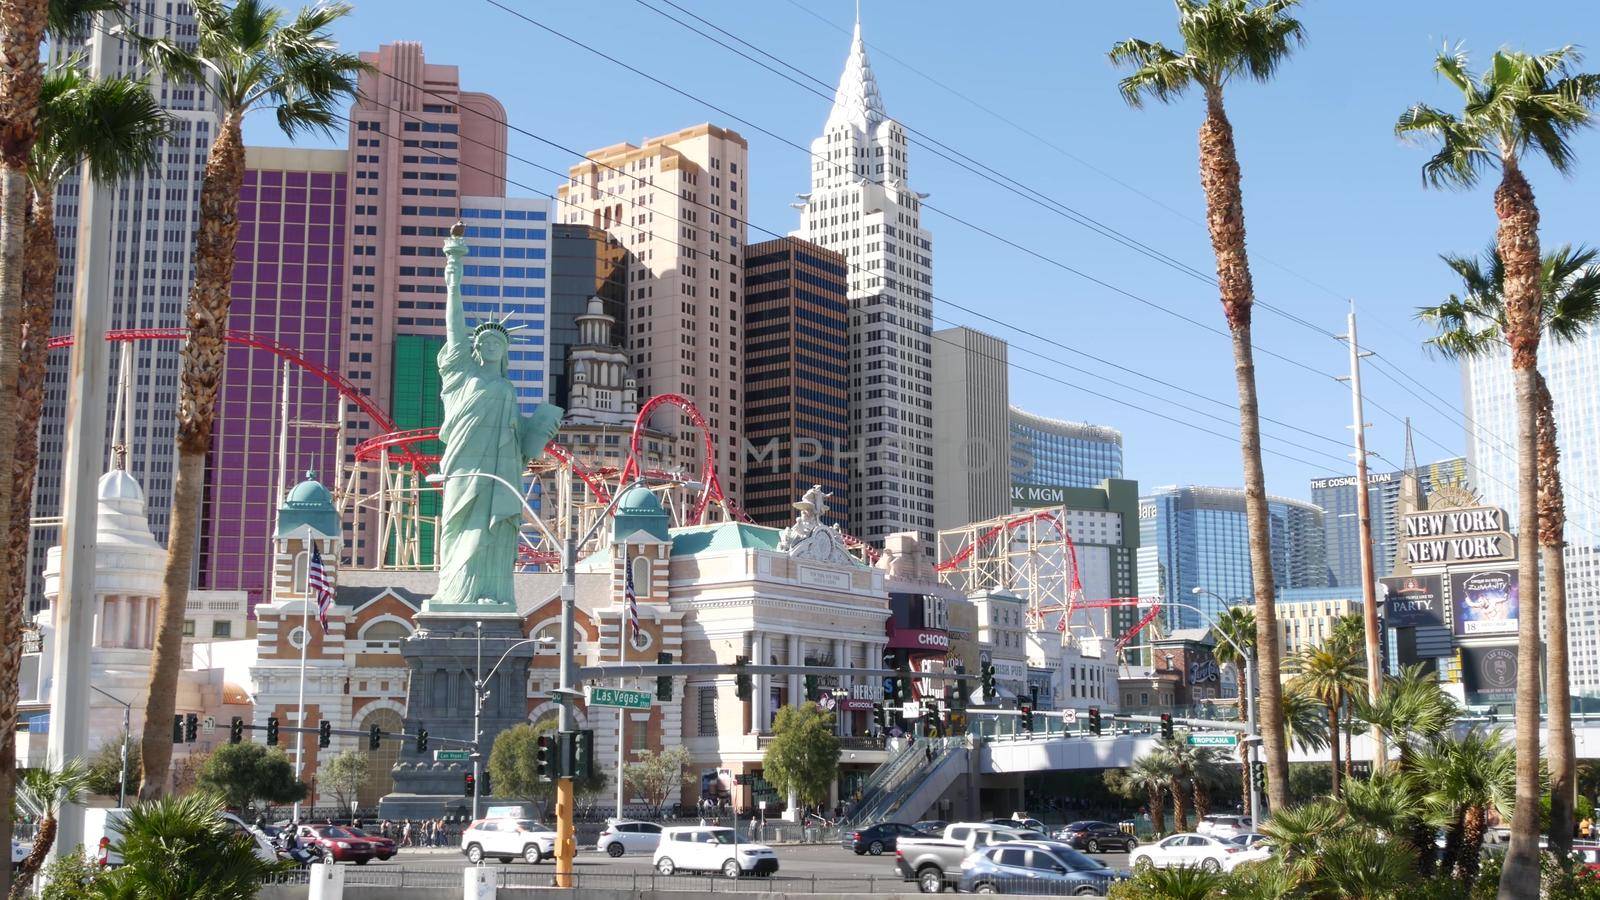 LAS VEGAS, NEVADA USA - 8 MAR 2020: The Strip boulevard with luxury casino in gambling sin city. Car traffic on road to Fremont street, tourist money playing resort. New York hotel and Liberty Statue.